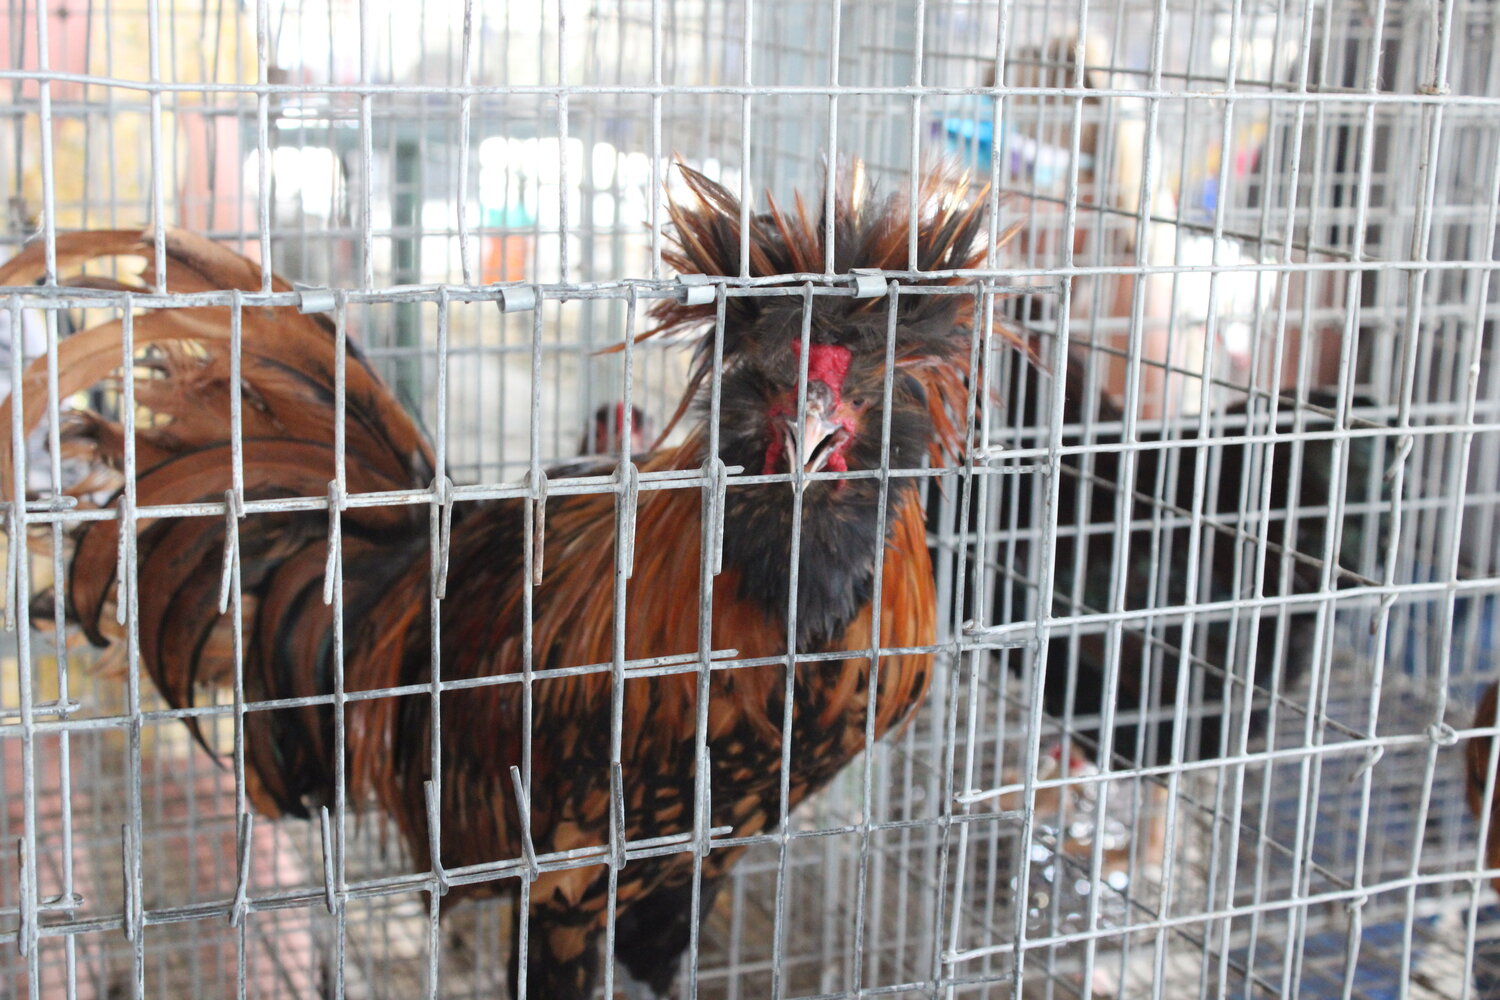 The winning rooster did not have a name, so it'll just have to go by "Champ" for the time being.